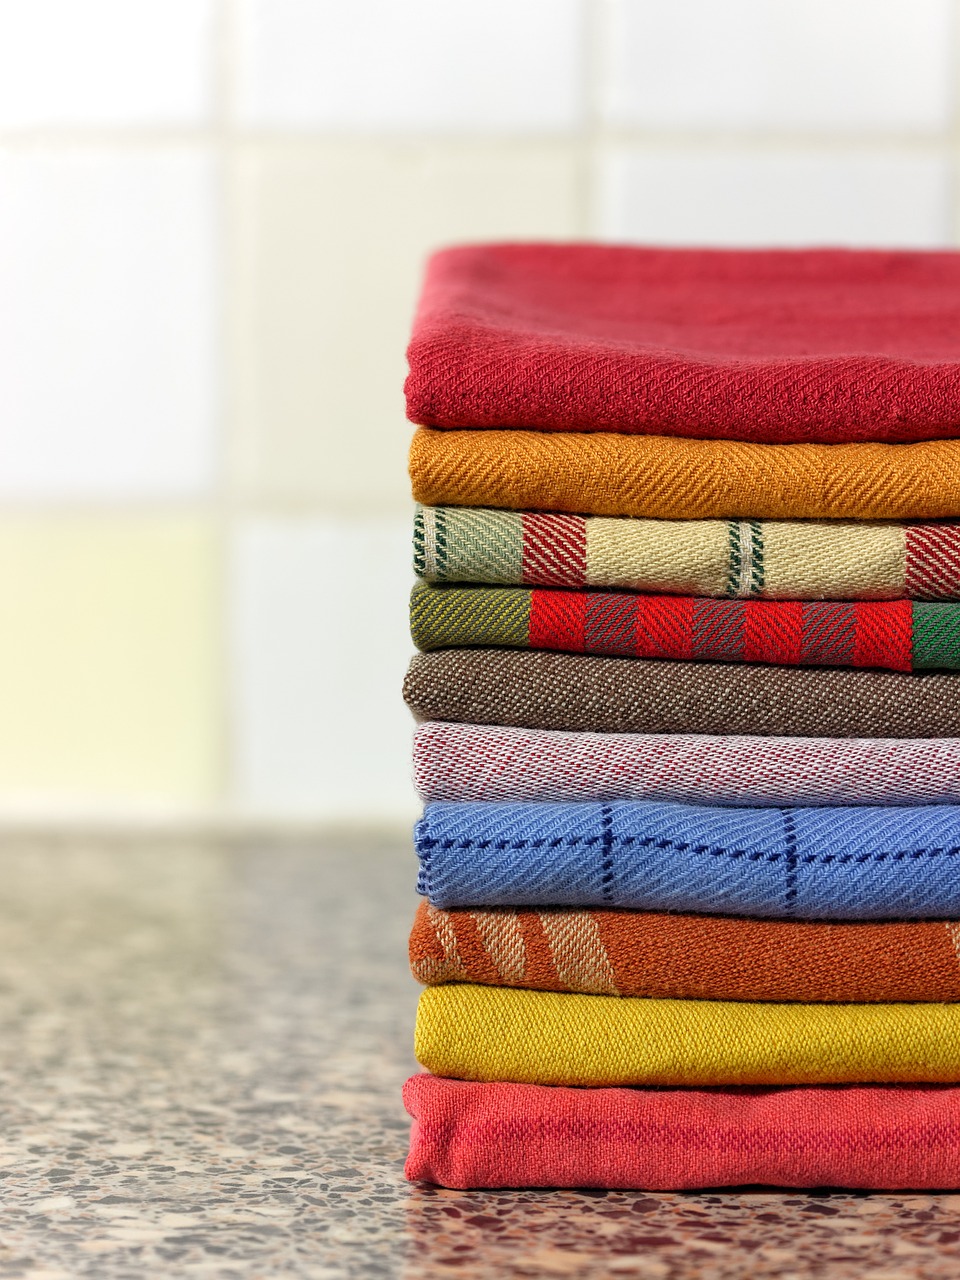 Kitchen Cleaning Cloth: Types, Uses, and Maintenance